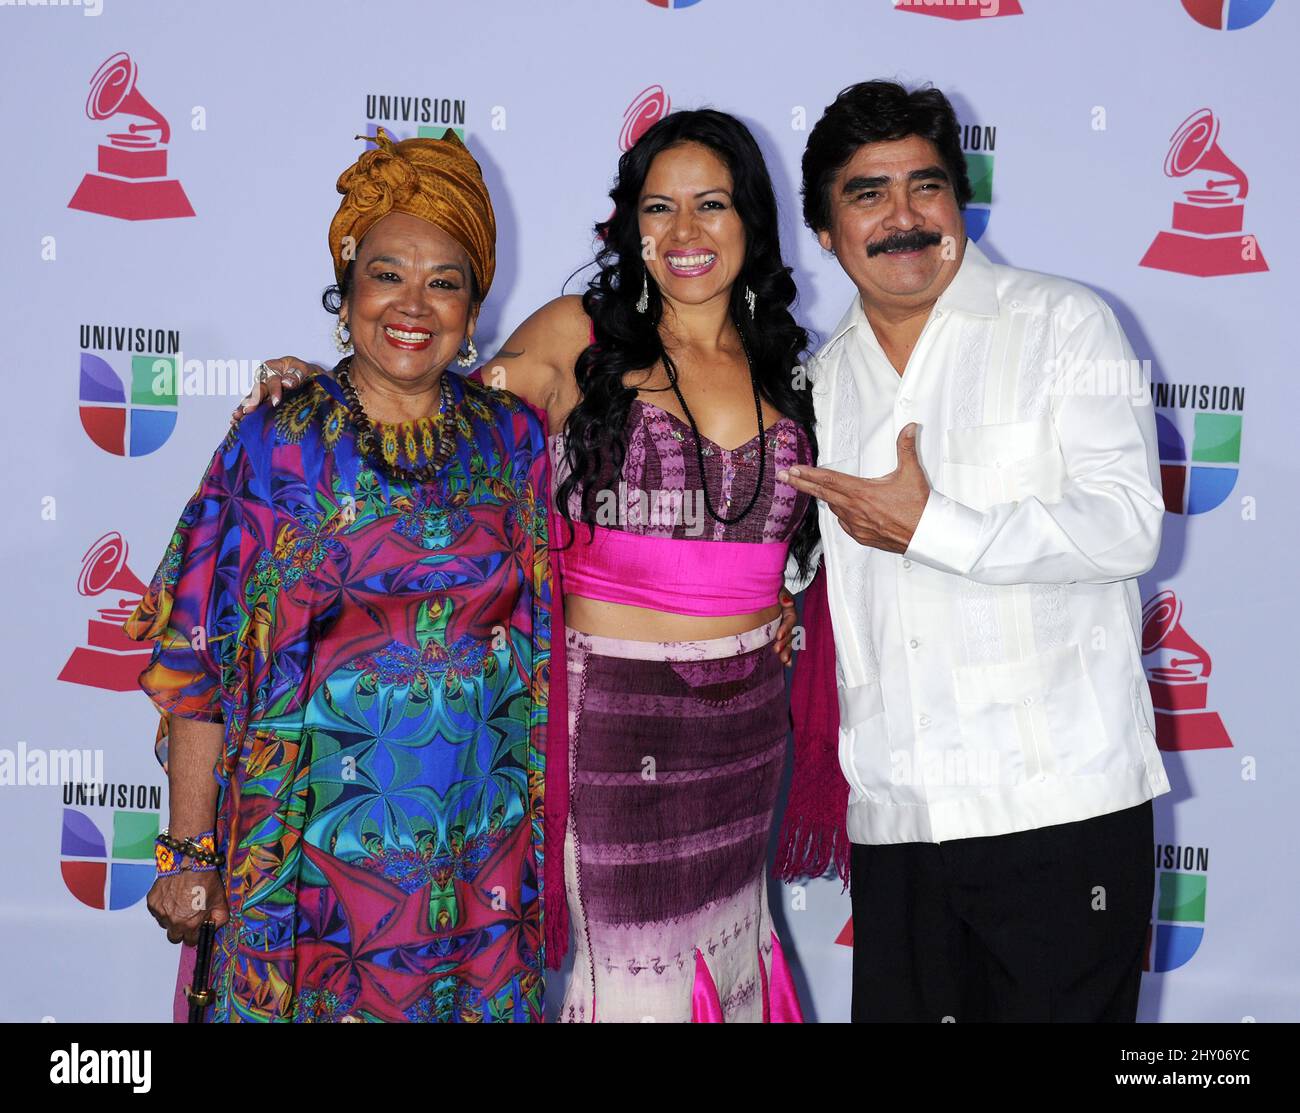 Lila Downs, Toto La Momposina and Celso Pina attends the 13th Annual Latin Grammy Awards held at the Mandalay Bay Events Center, Las Vegas, Nevada on November 15, 2012. Stock Photo